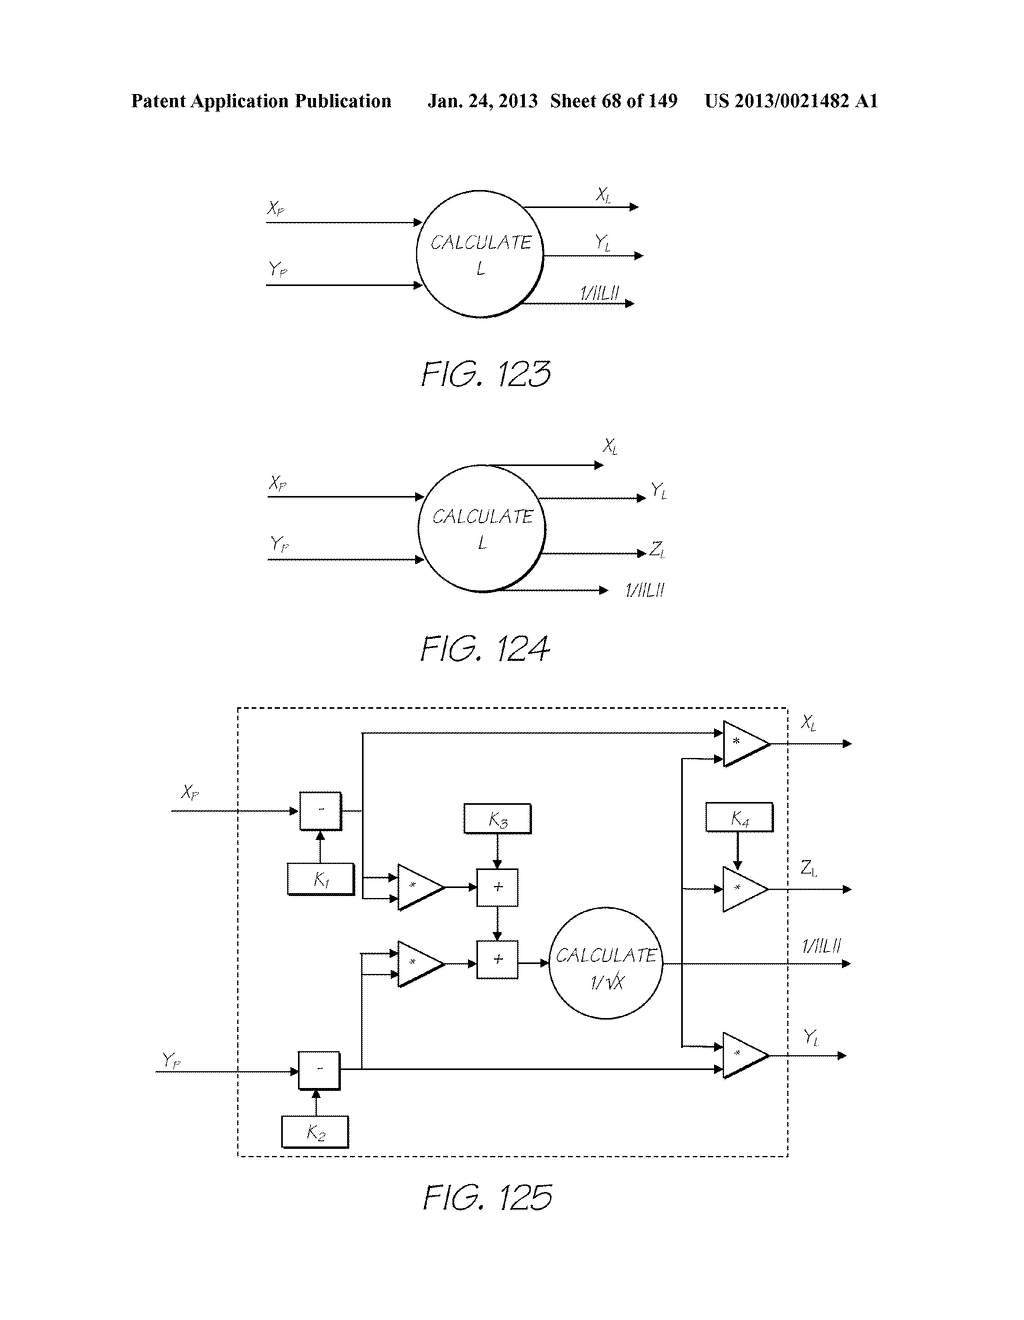 HANDHELD IMAGING DEVICE WITH SYSTEM-ON-CHIP MICROCONTROLLER INCORPORATING     ON SHARED WAFER IMAGE PROCESSOR AND IMAGE SENSOR - diagram, schematic, and image 69